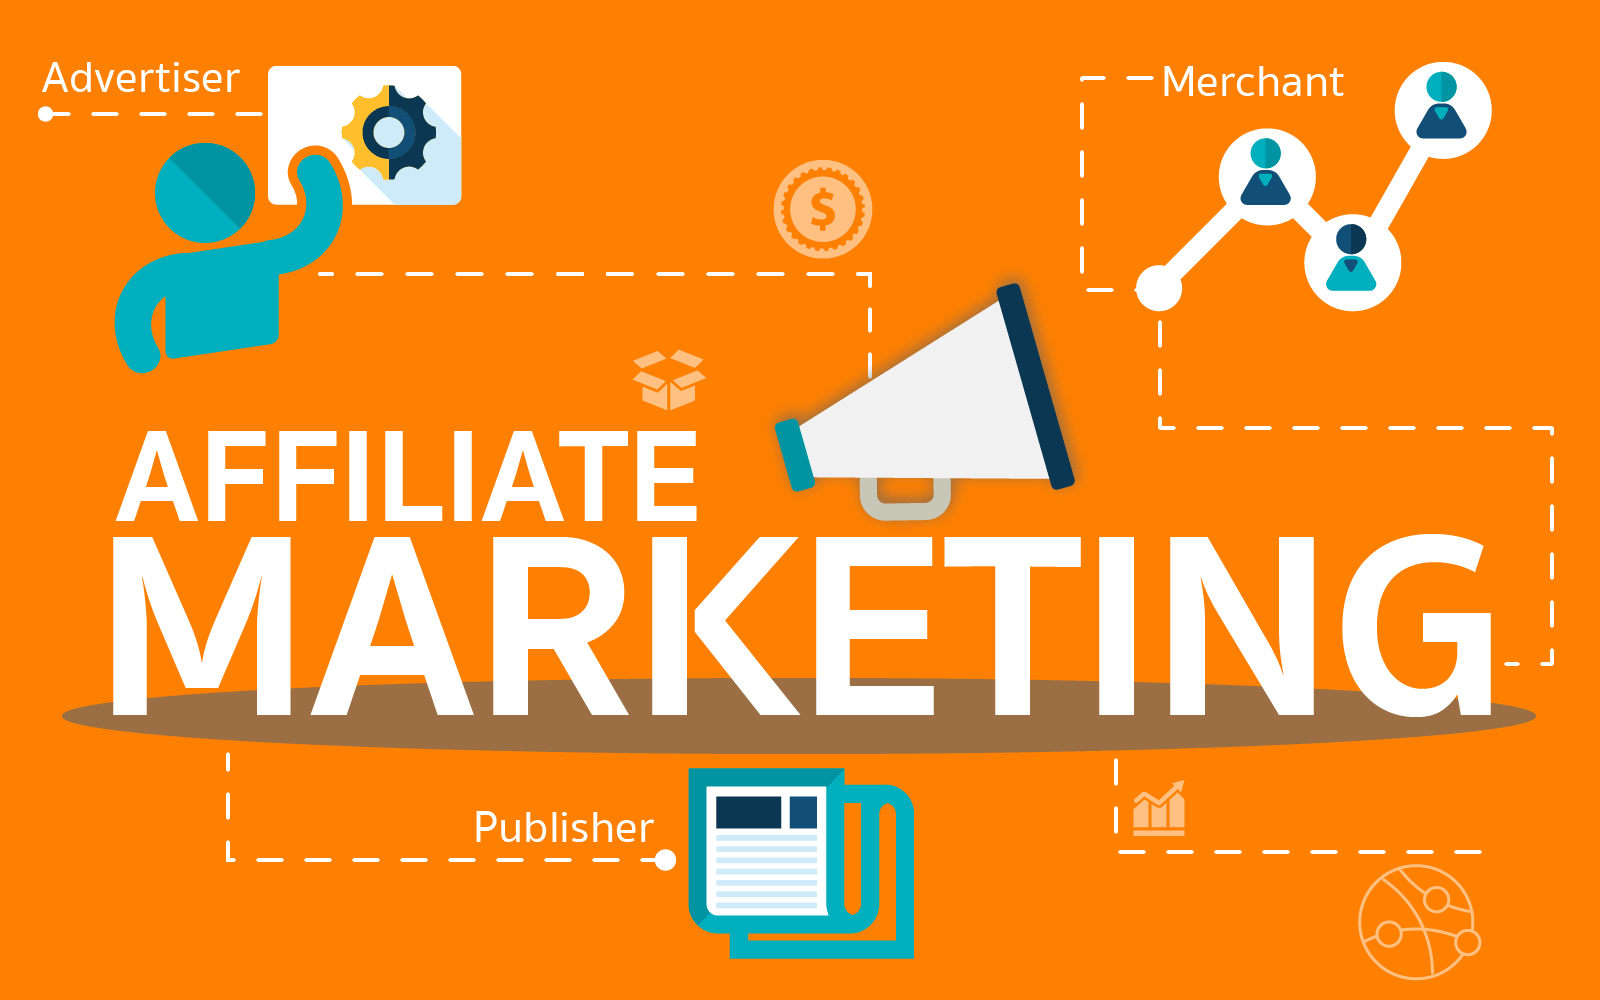 How To Start Affiliate Marketing For Beginners | 2020 Guide